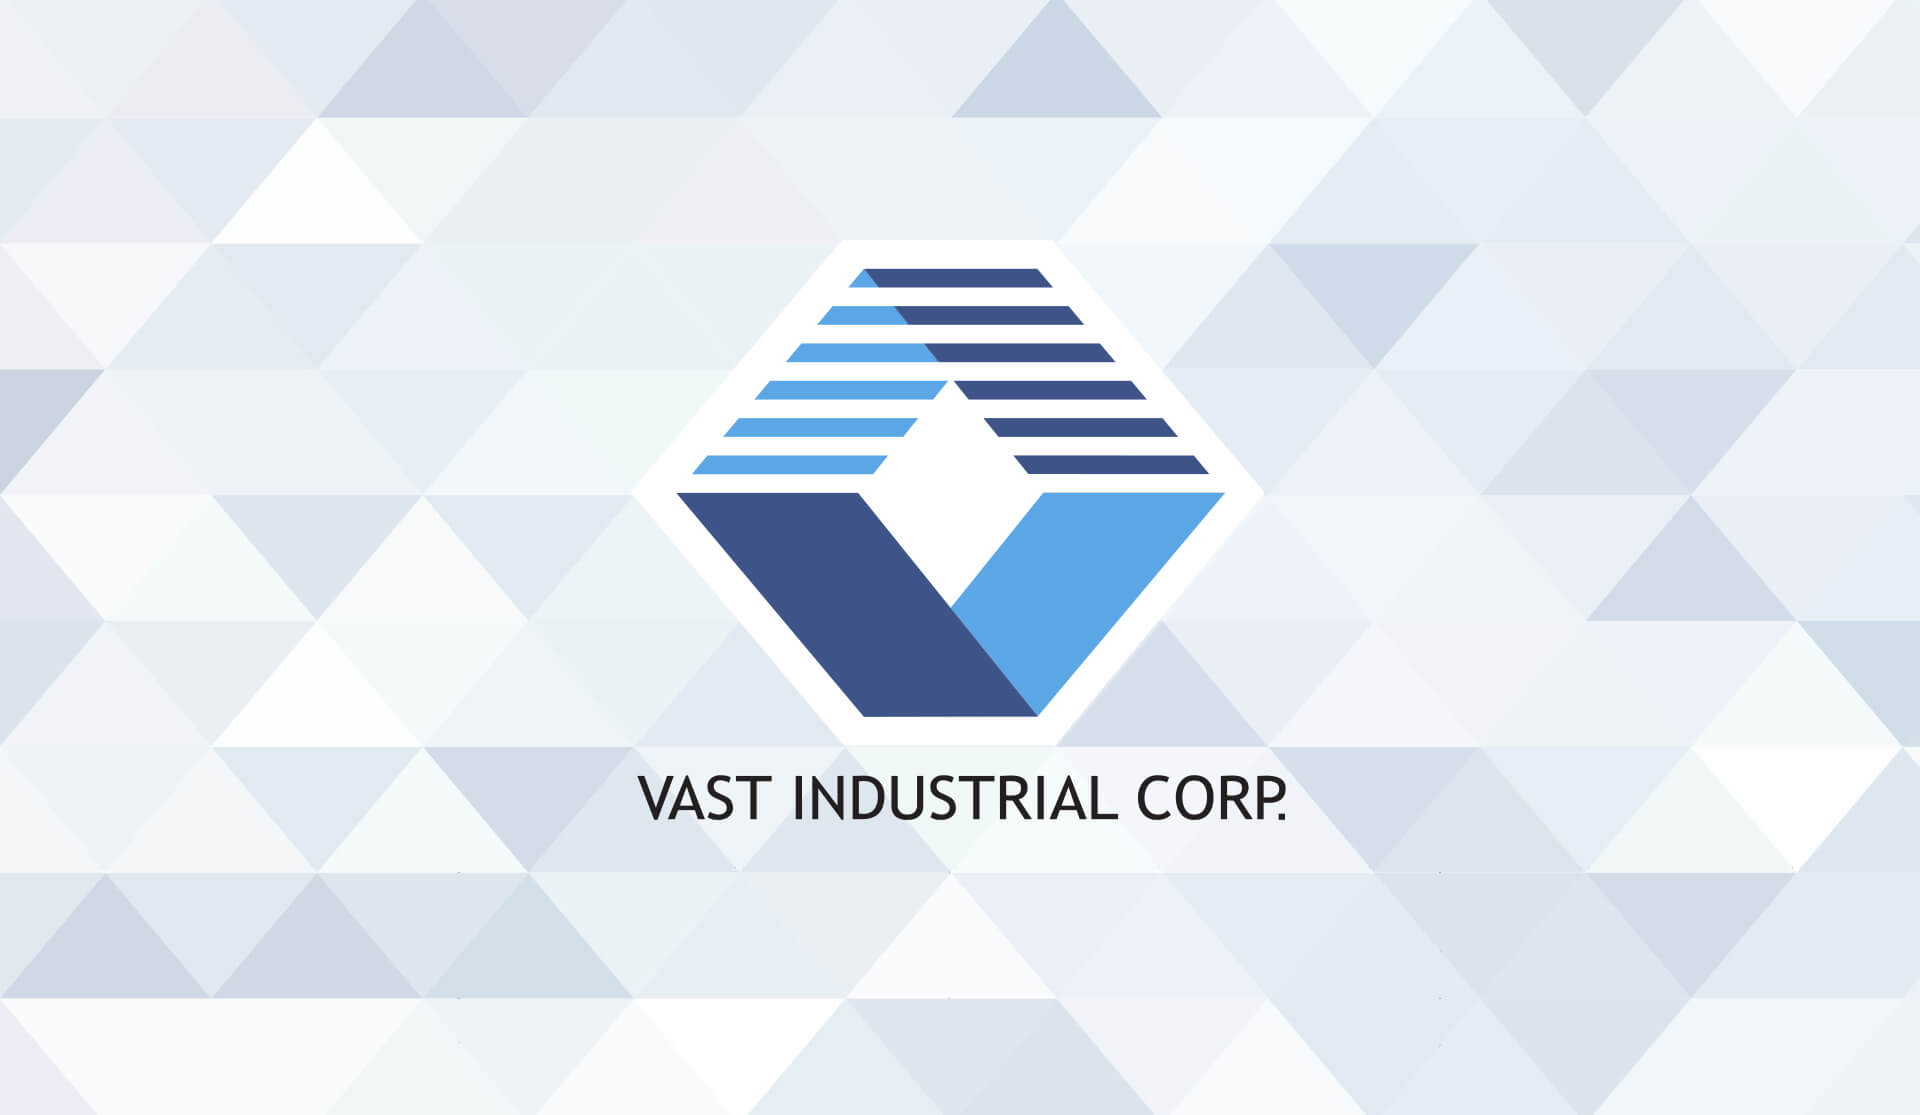 VAST Industrial Corp. Logo and Background